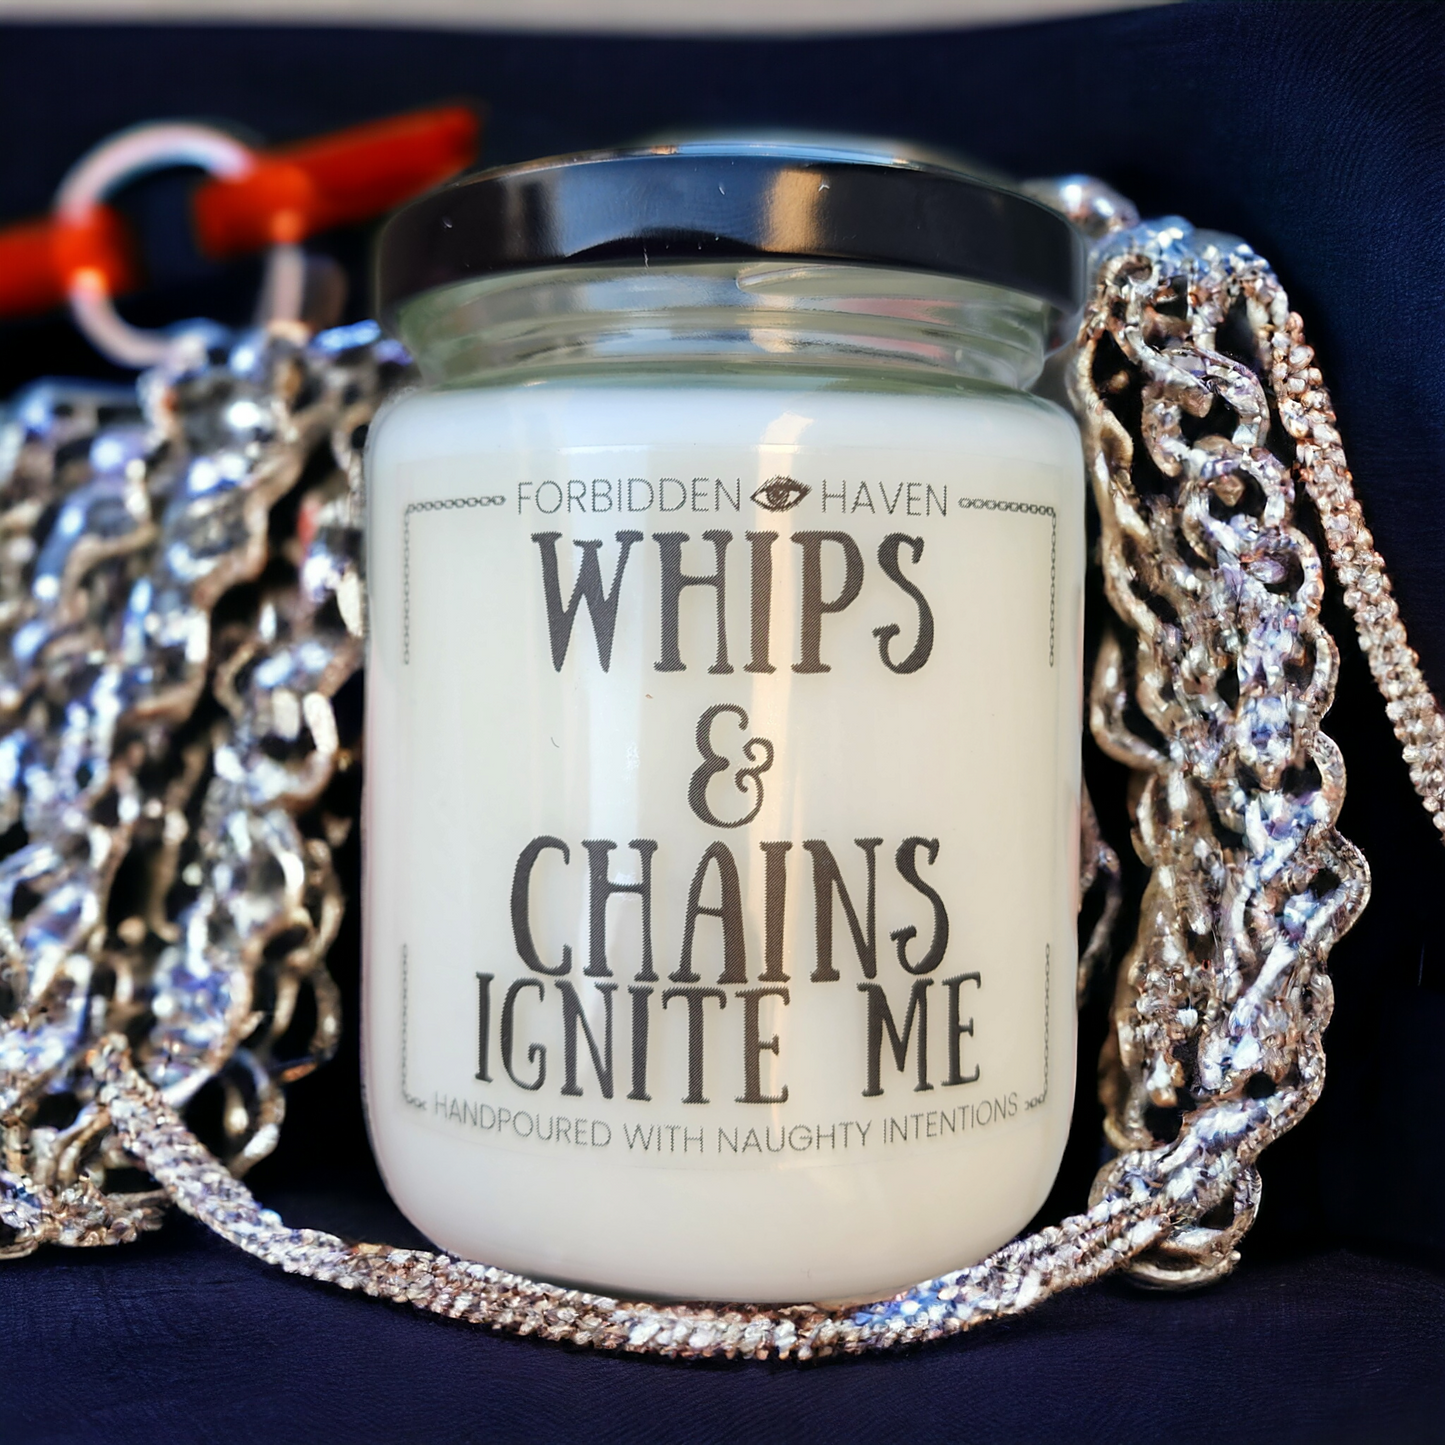 Whips & Chains Ignite Me